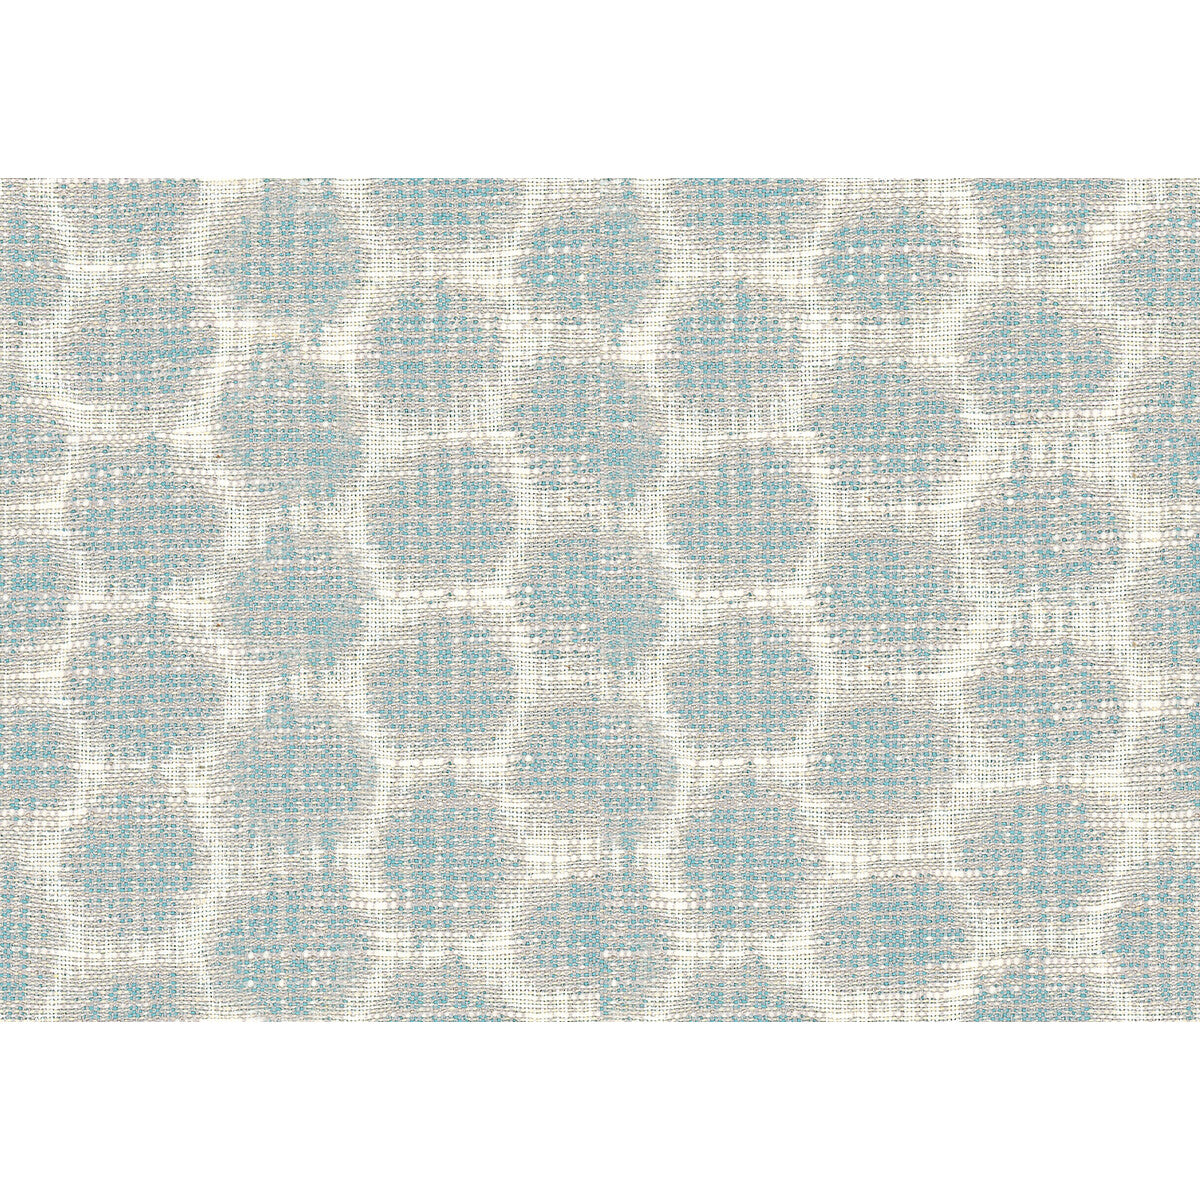 Kravet Smart fabric in 33134-1613 color - pattern 33134.1613.0 - by Kravet Smart in the Echo collection